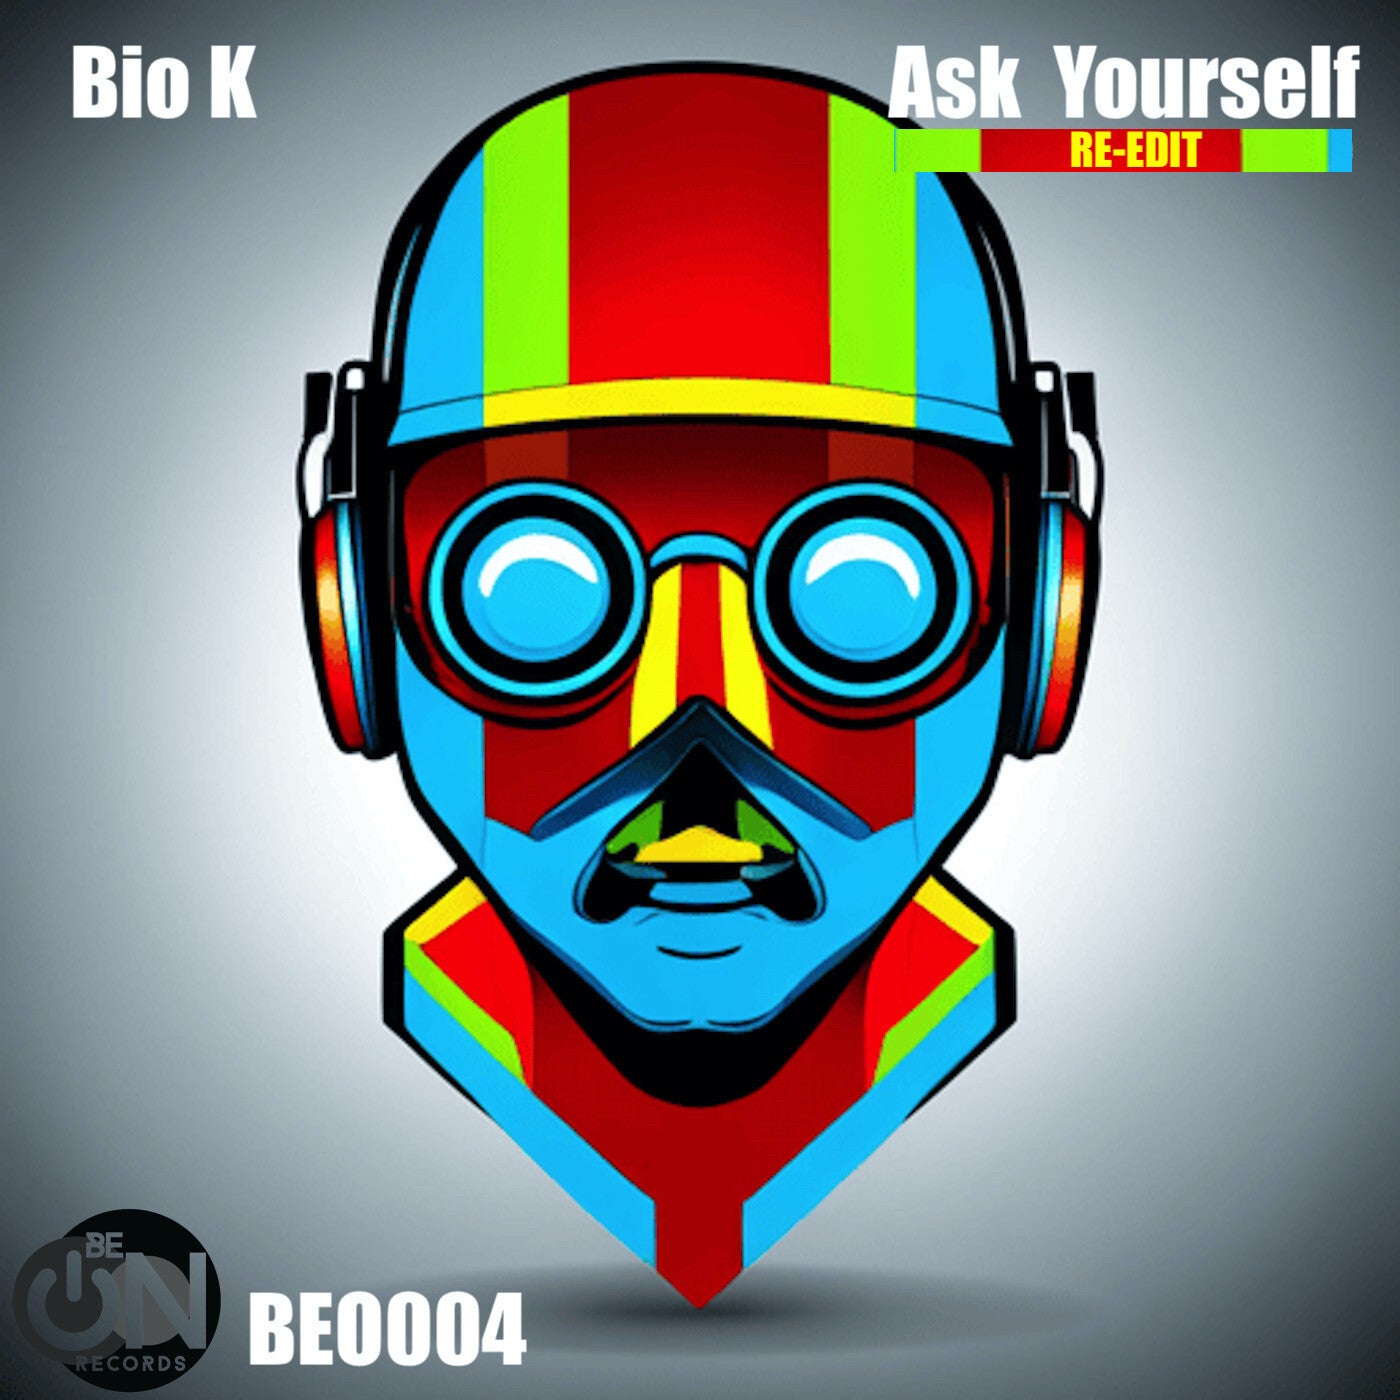 Ask Yourself (Re-edit)